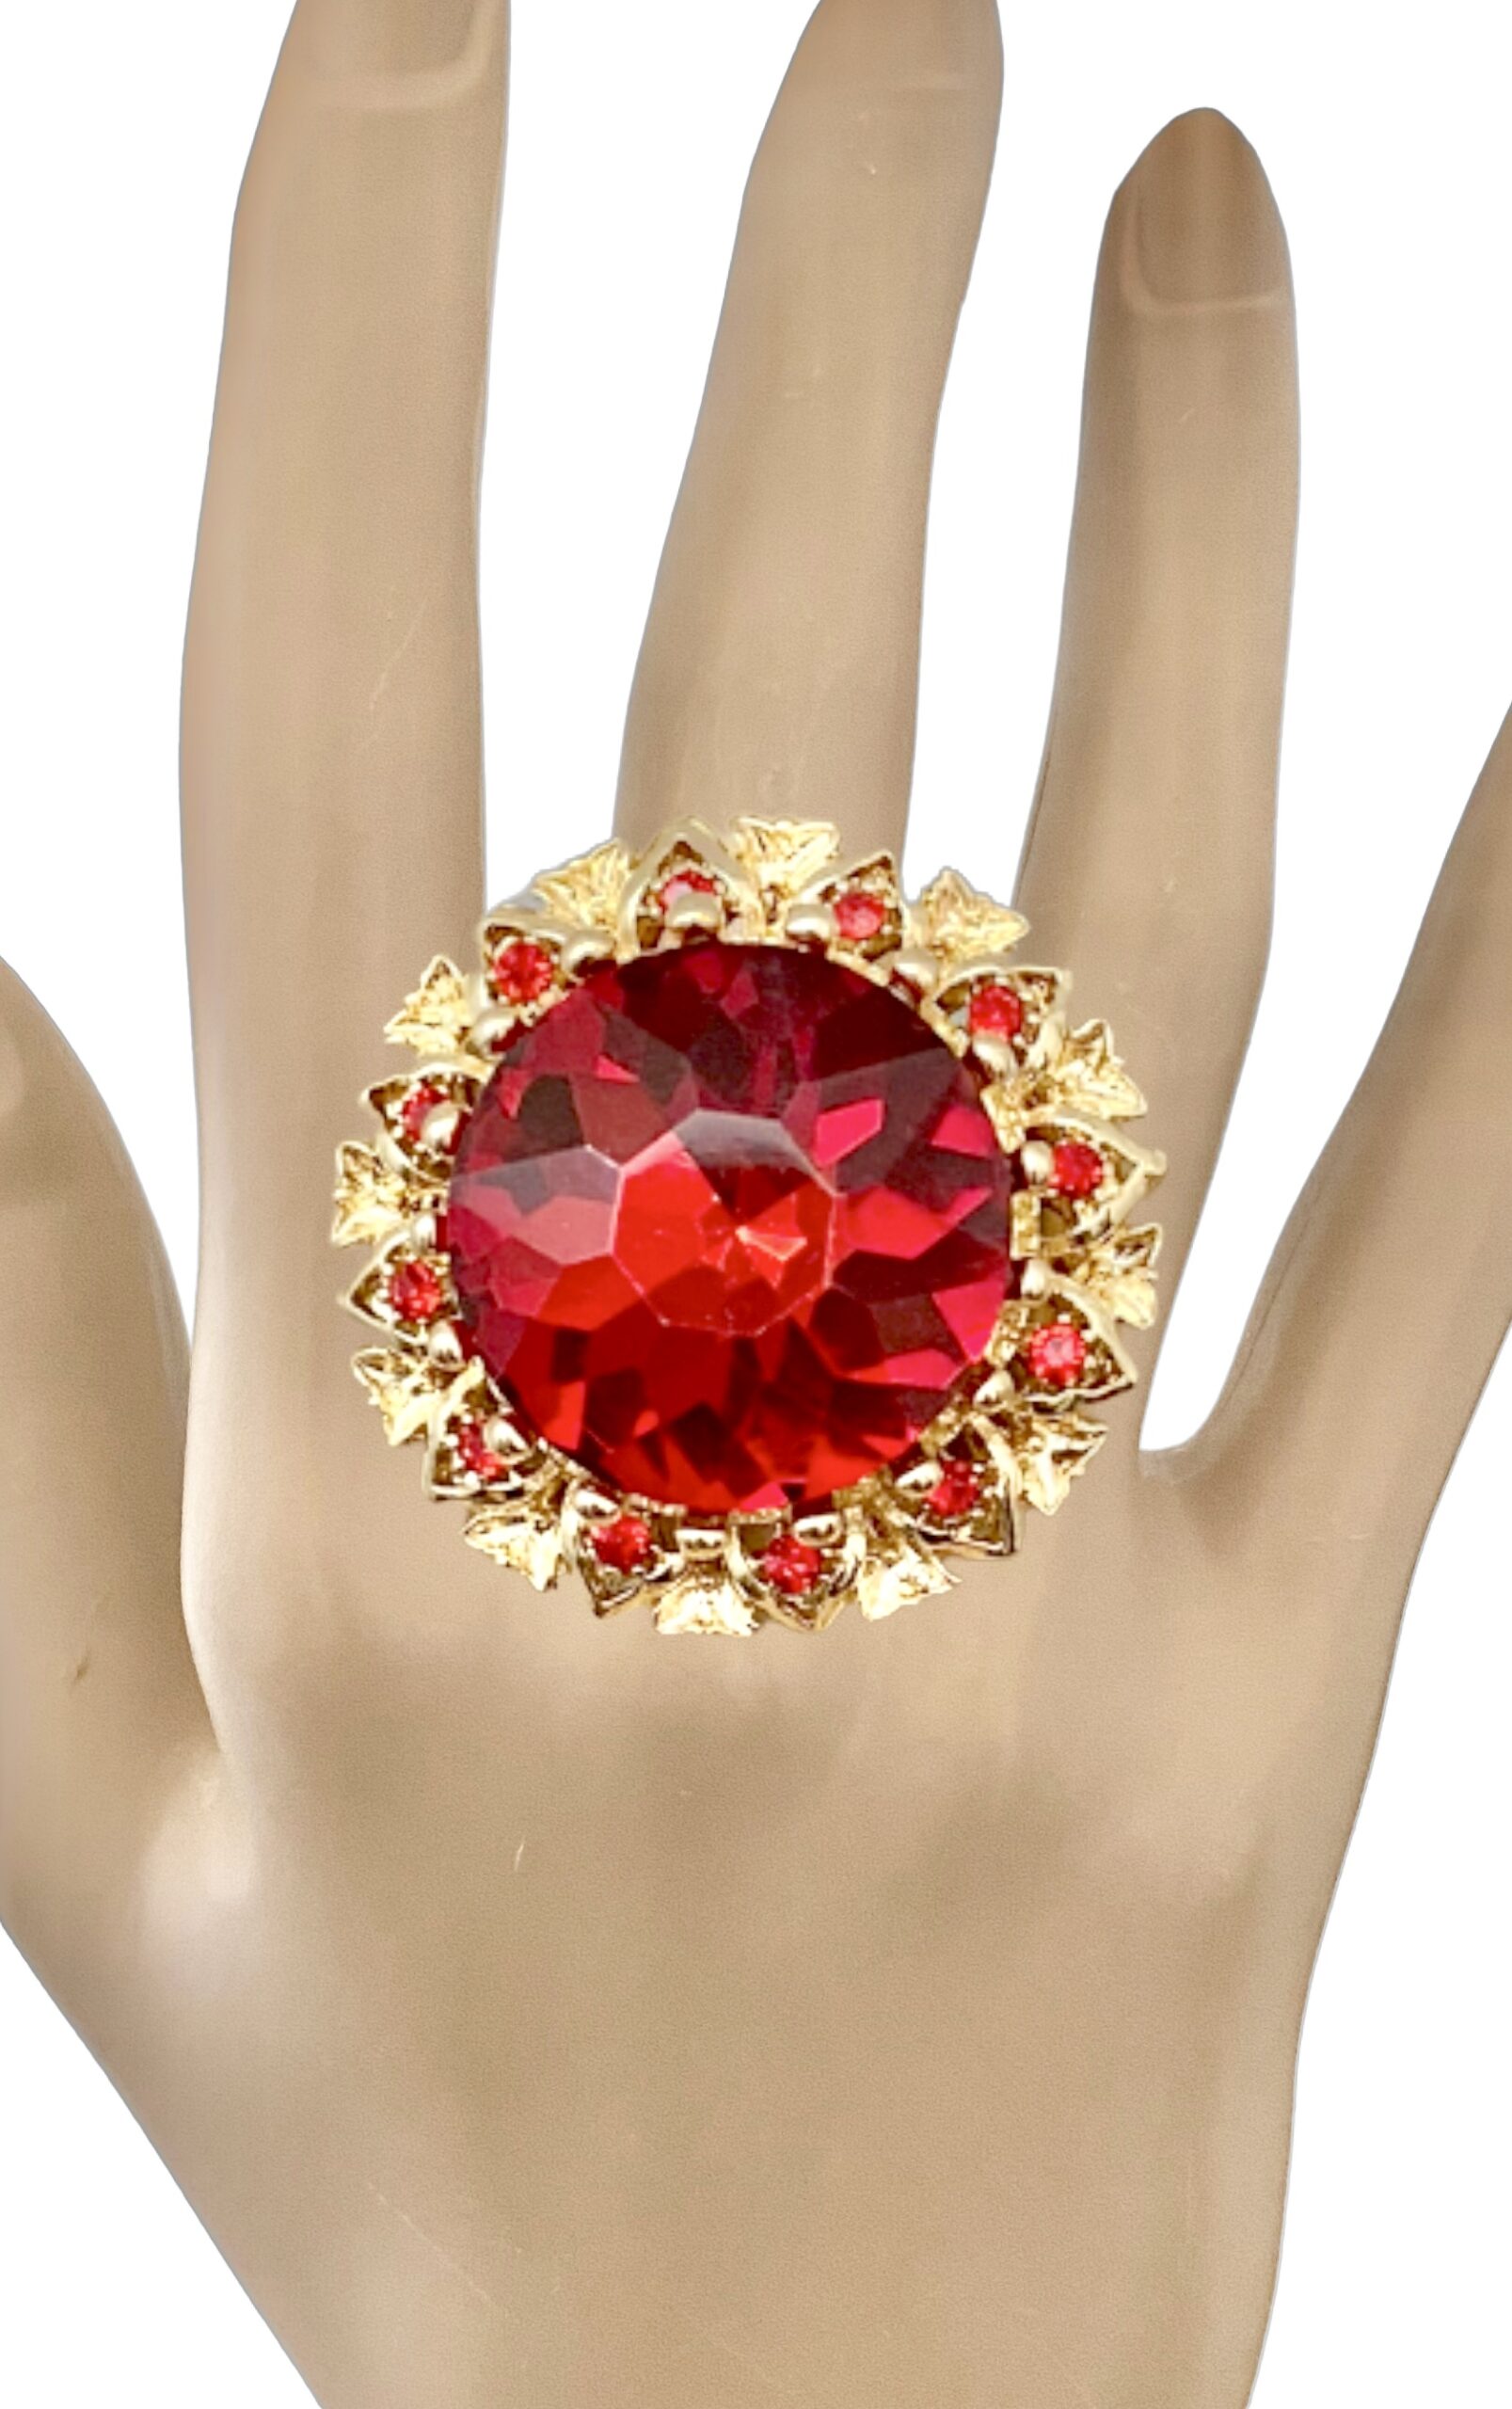 Statement ring stretch red acrylic center stone small red rhinestones